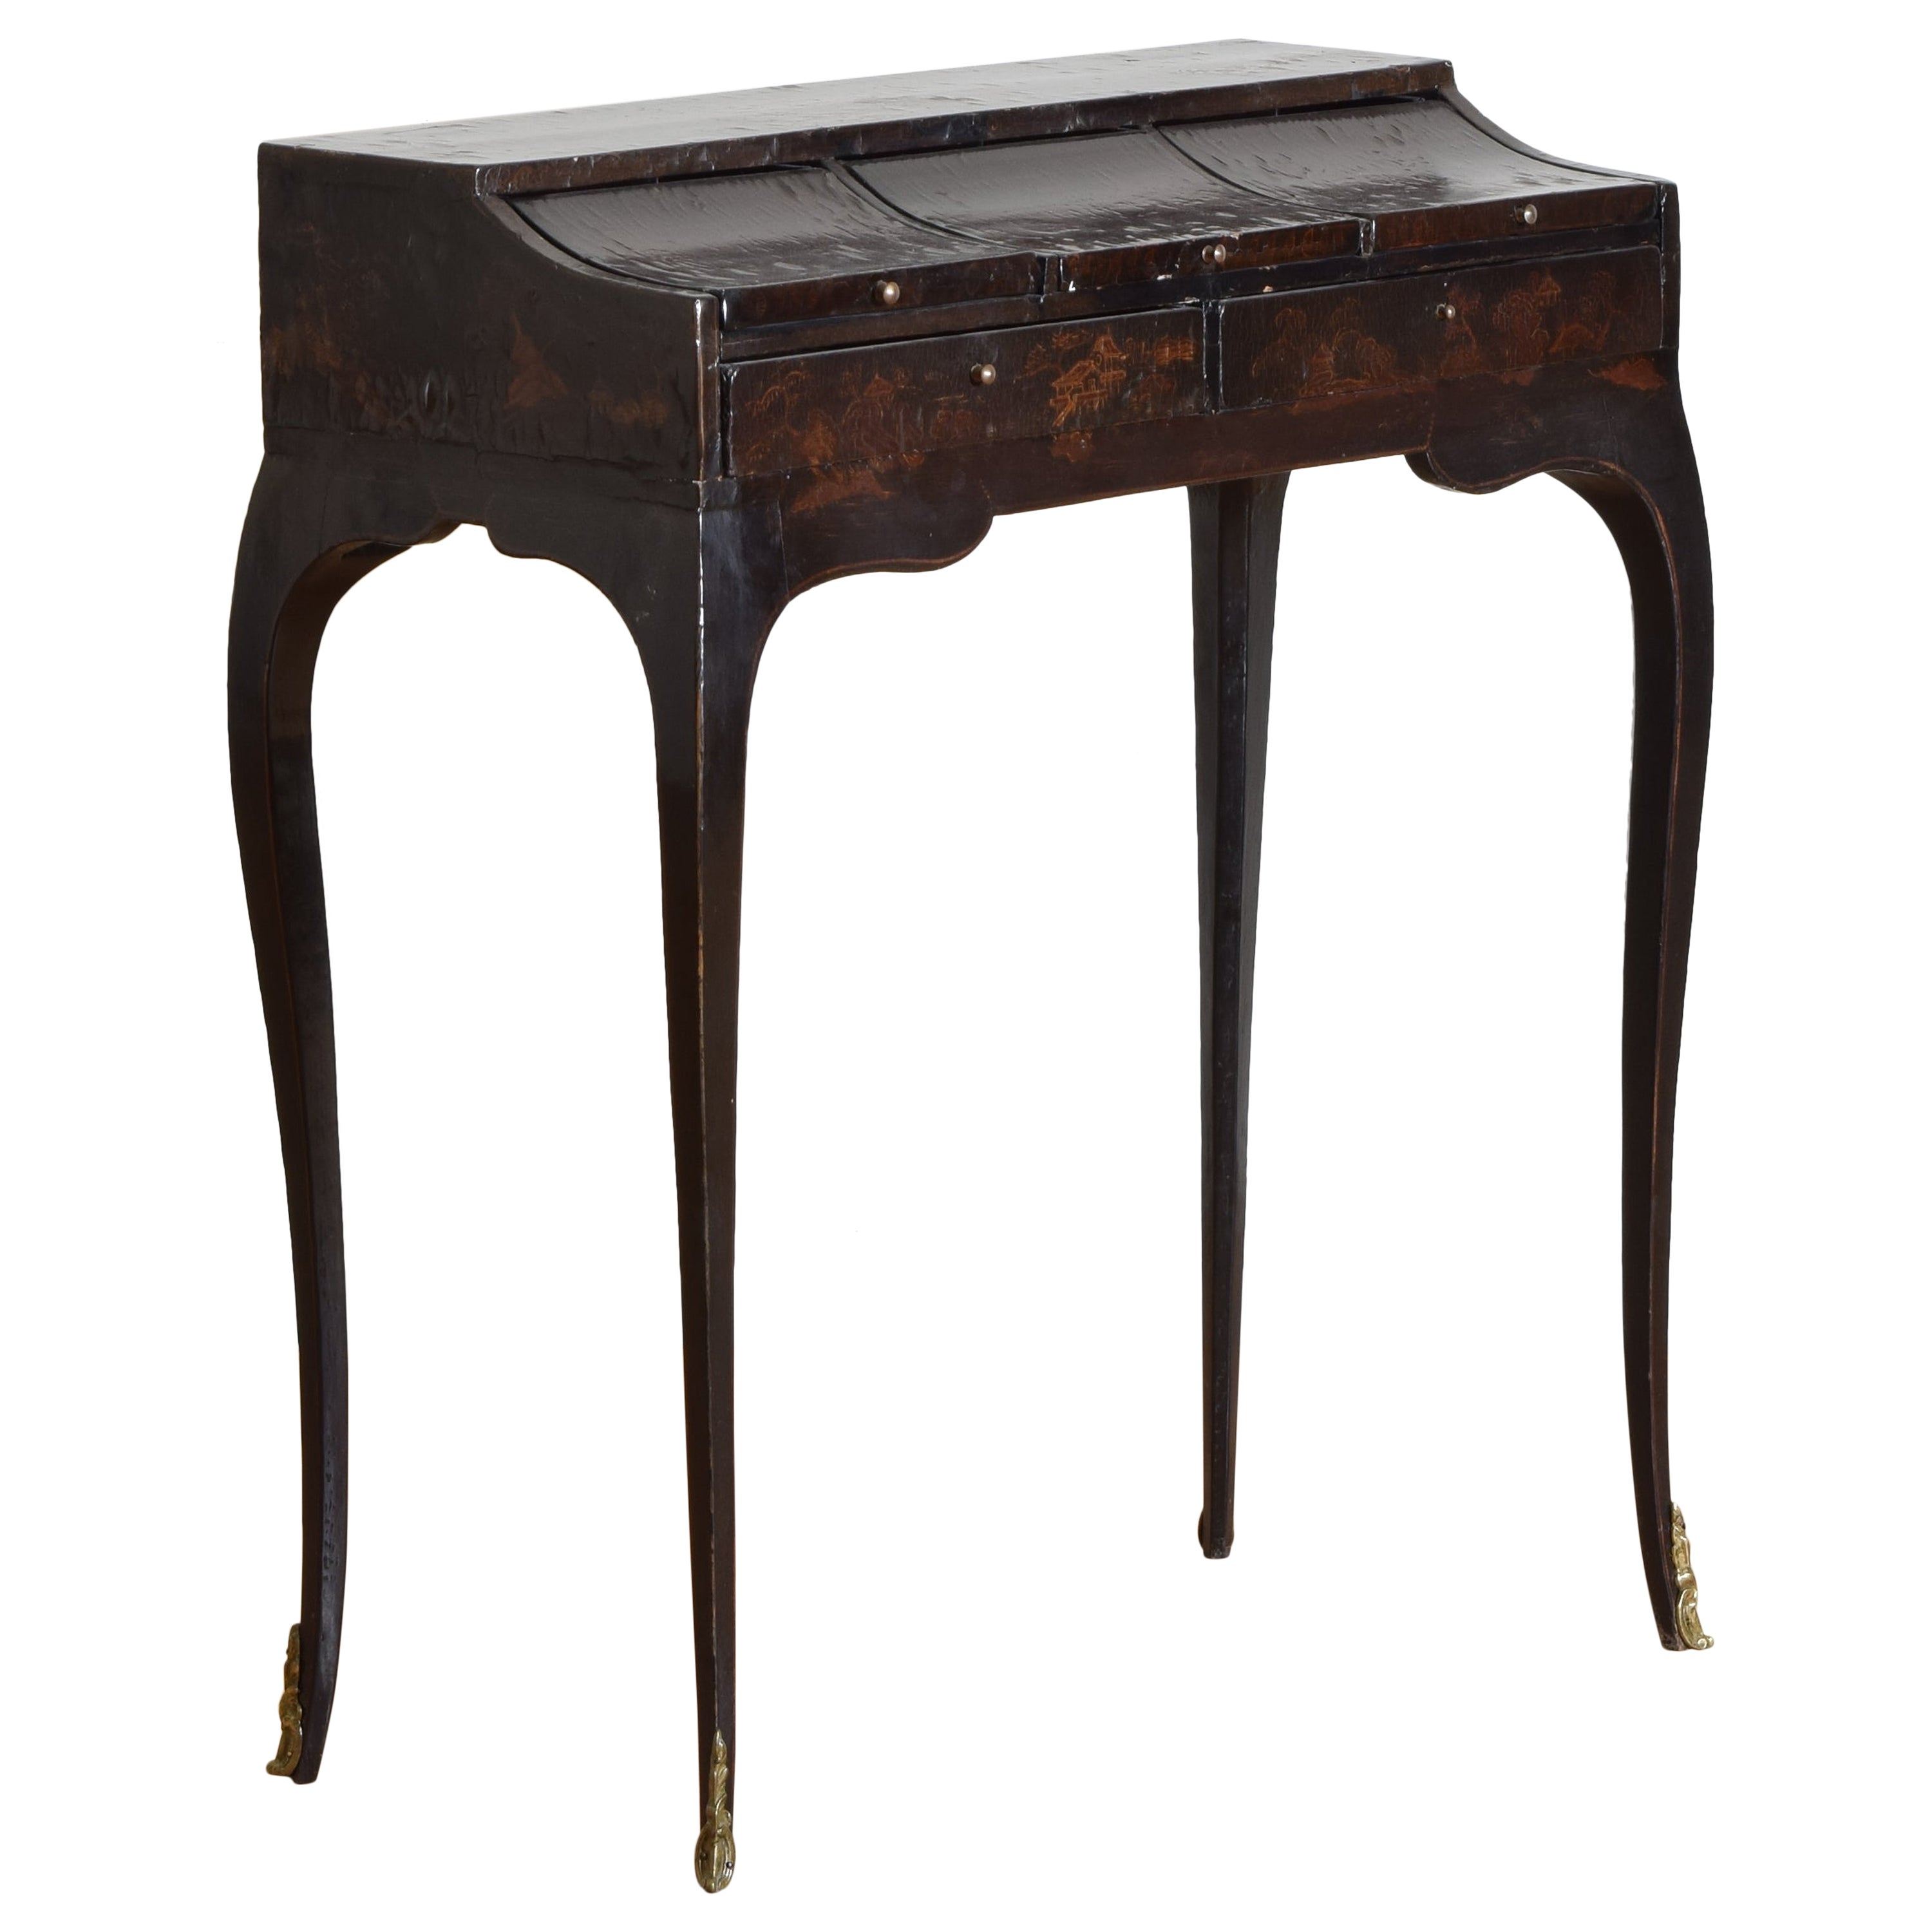 Lacquered and Veneered Bureau de Dame, 18th to 19th C. For Sale